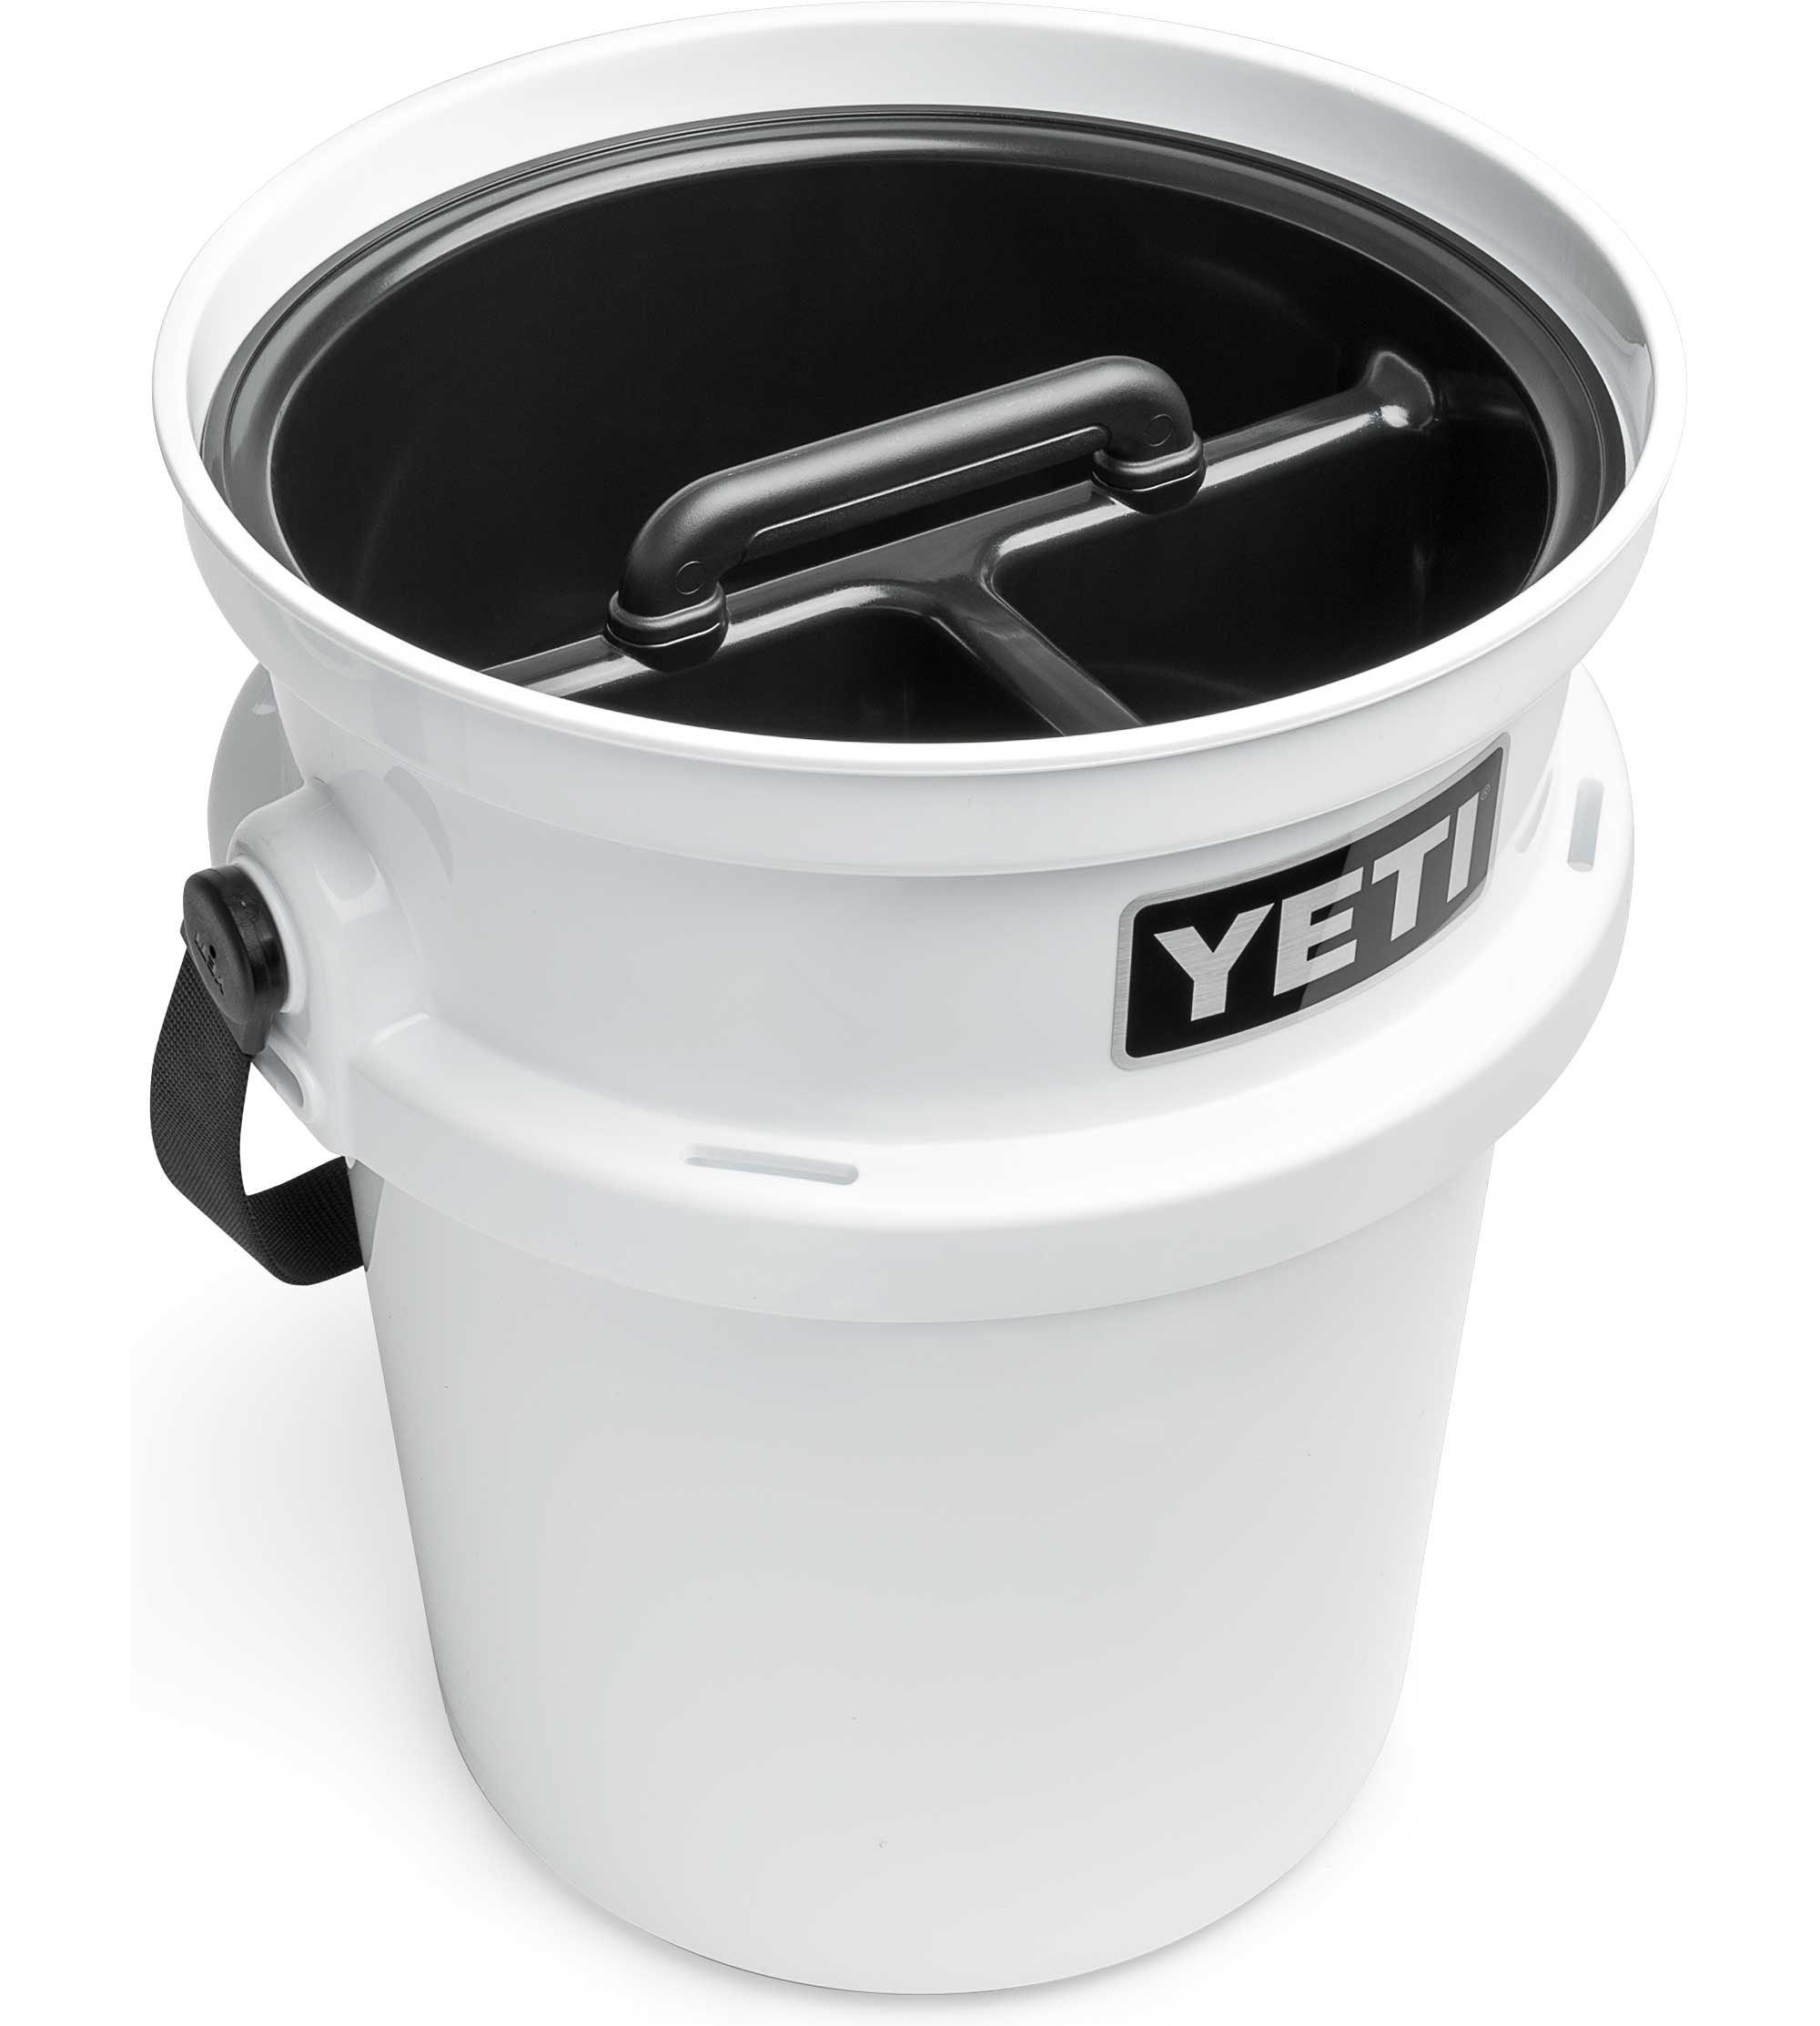 Loadout Bucket Caddy - Black - Purpose-Built / Home of the Trades